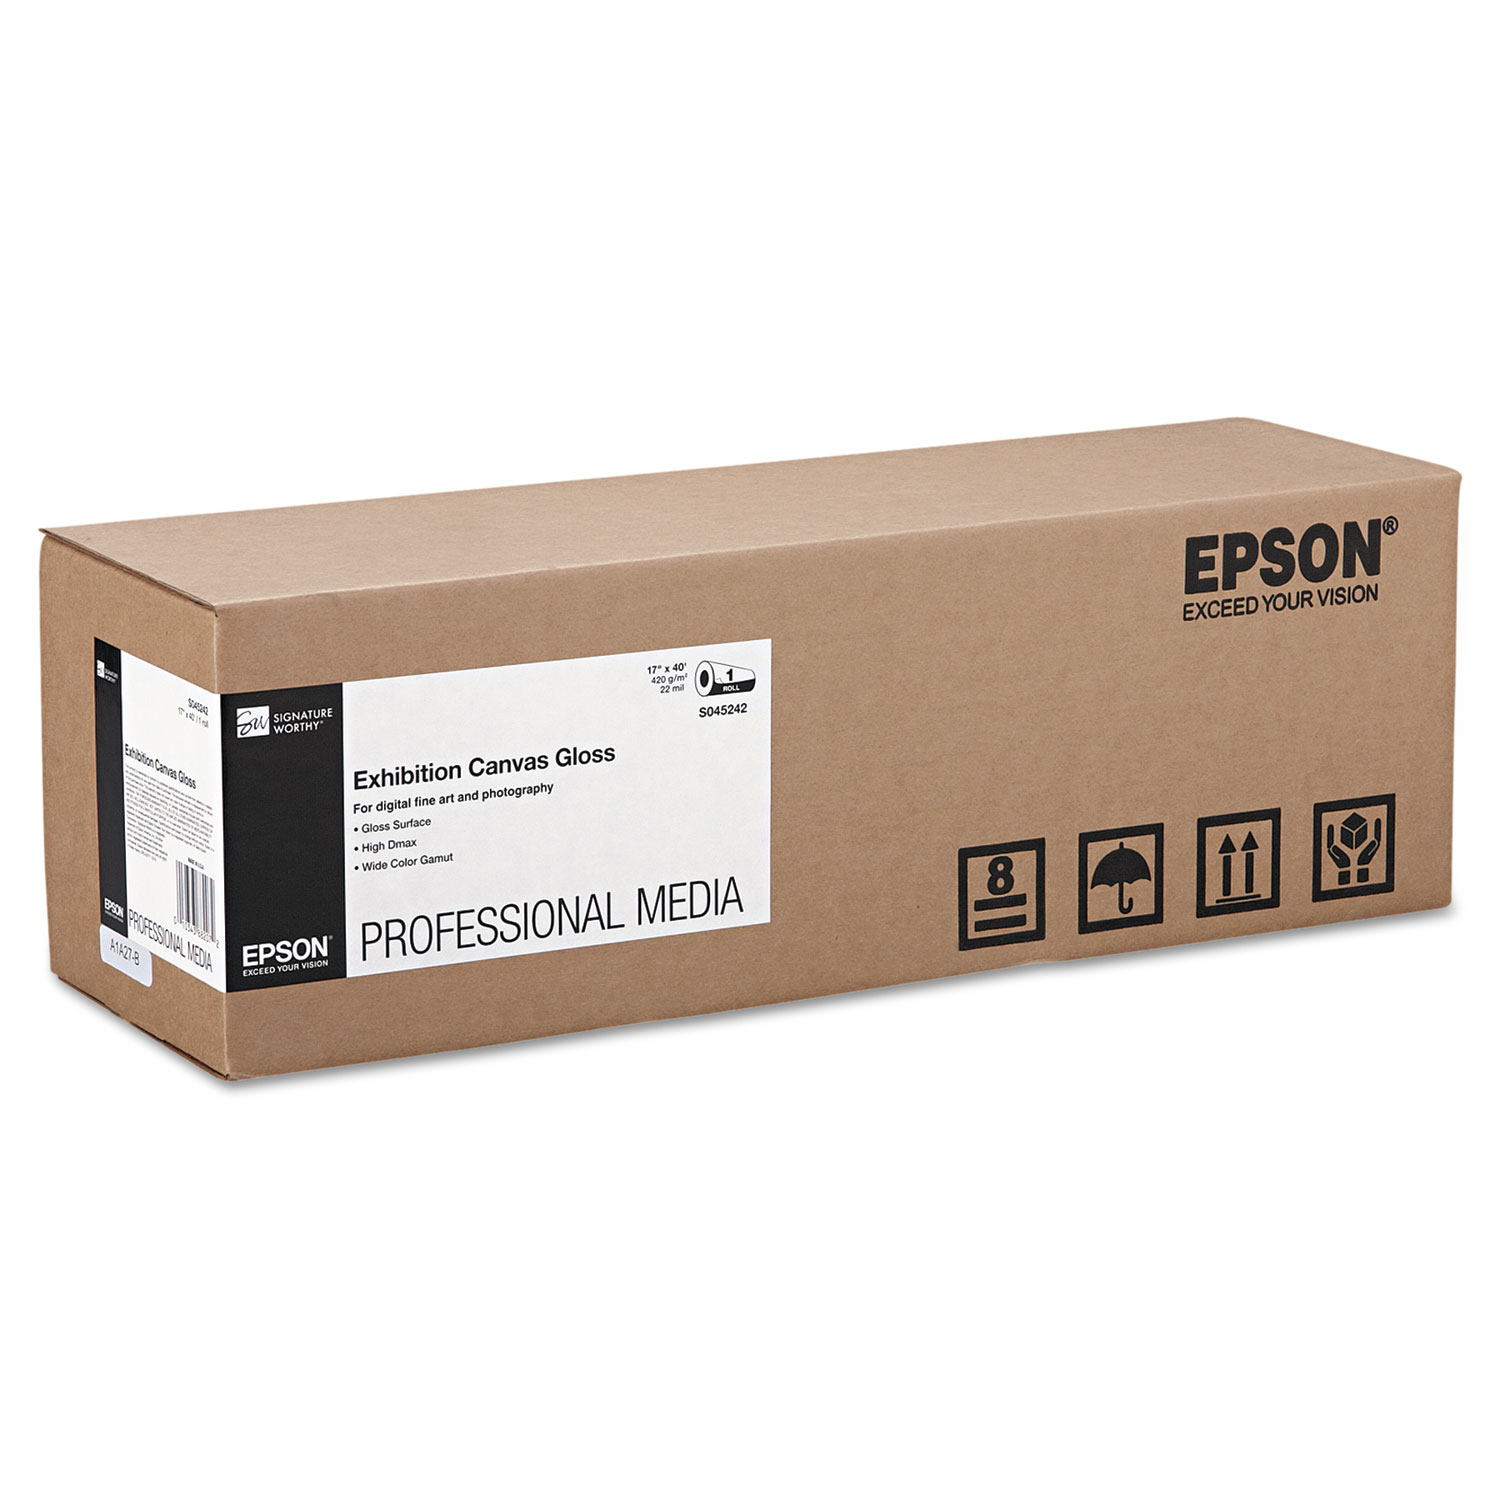  Epson S045242 Exhibition Canvas, 22 mil, 17 x 40 ft, Glossy White (EPSS045242) 